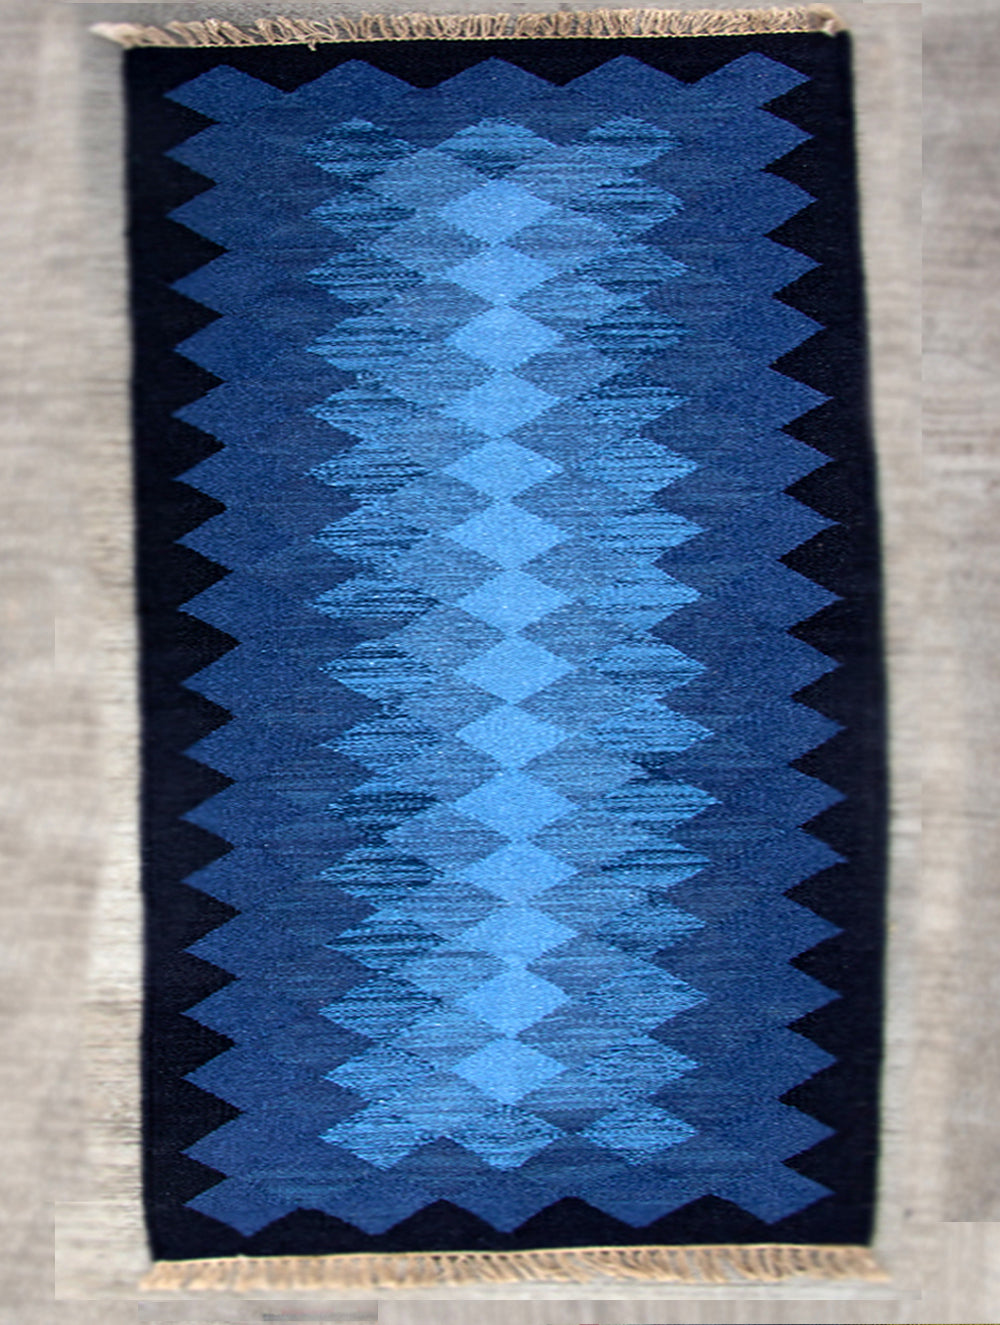 Load image into Gallery viewer, Handwoven Kilim Rug (6 x 4 ft) - Zigzags - The India Craft House 